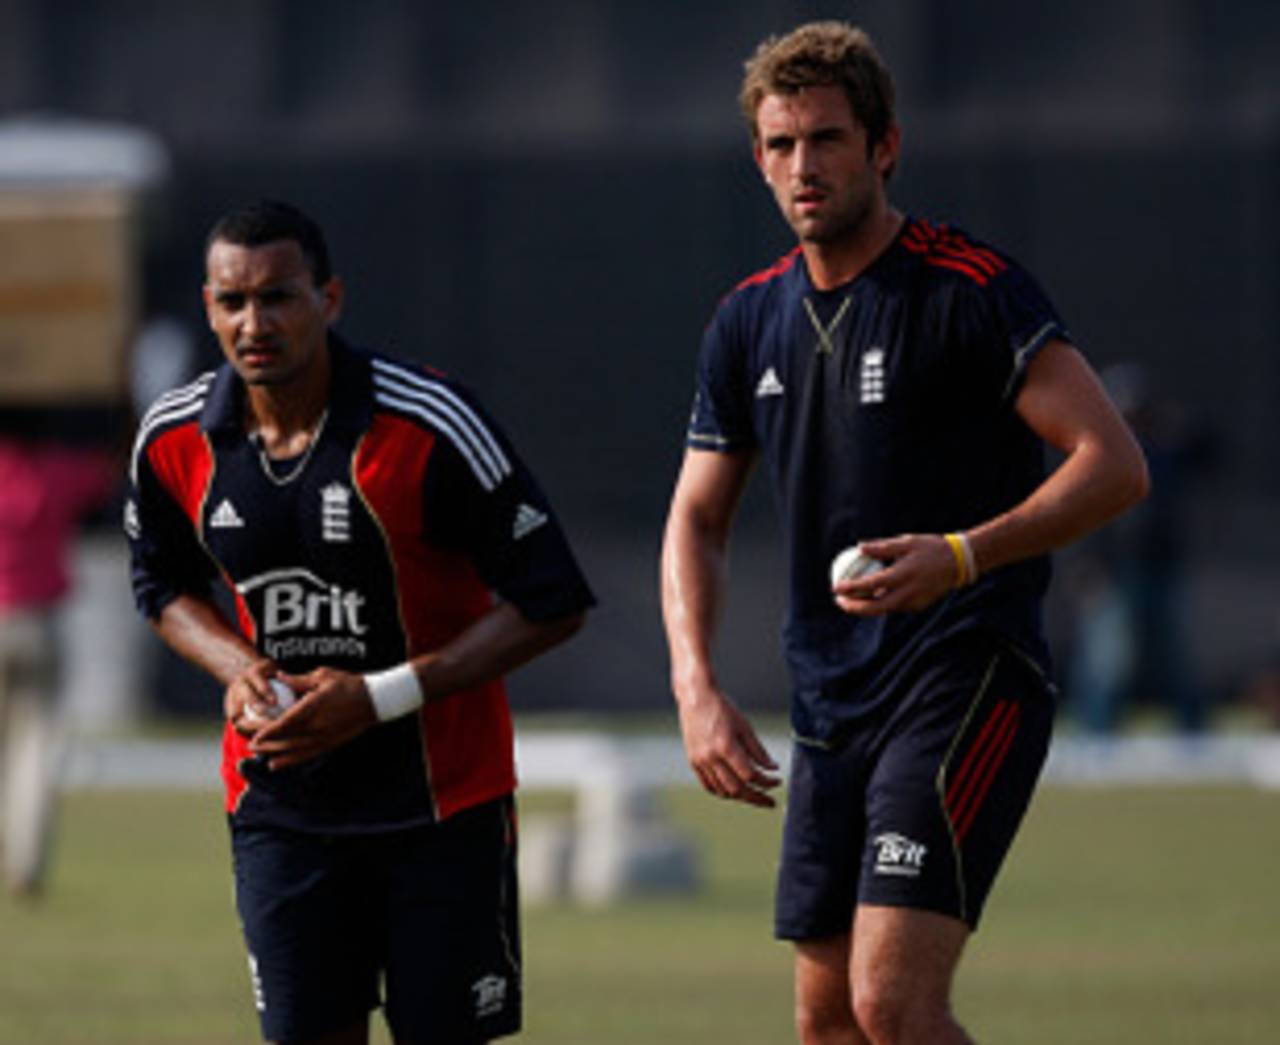 The injury to Ajmal Shahzad (left) has meant a call-up for Liam Plunkett (right)&nbsp;&nbsp;&bull;&nbsp;&nbsp;Getty Images